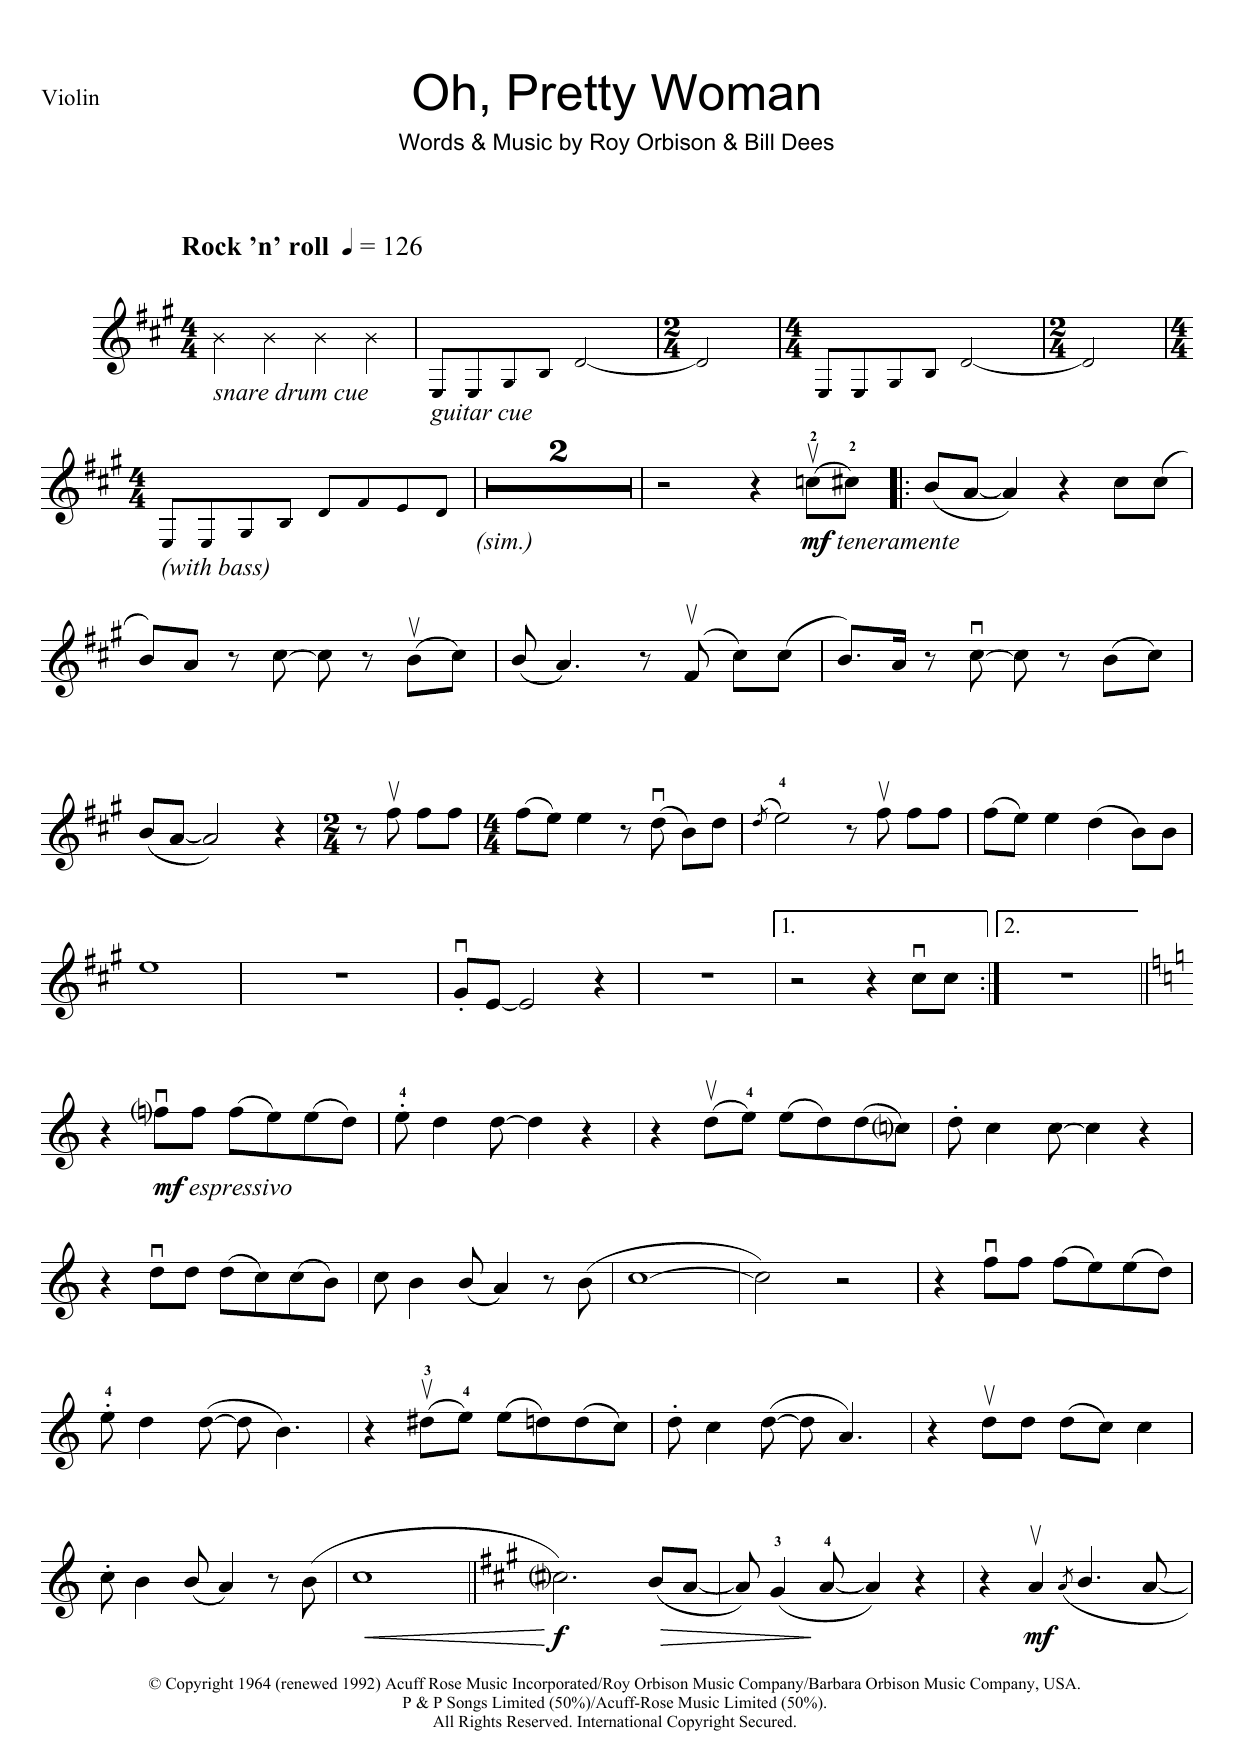 Download Roy Orbison Oh, Pretty Woman Sheet Music